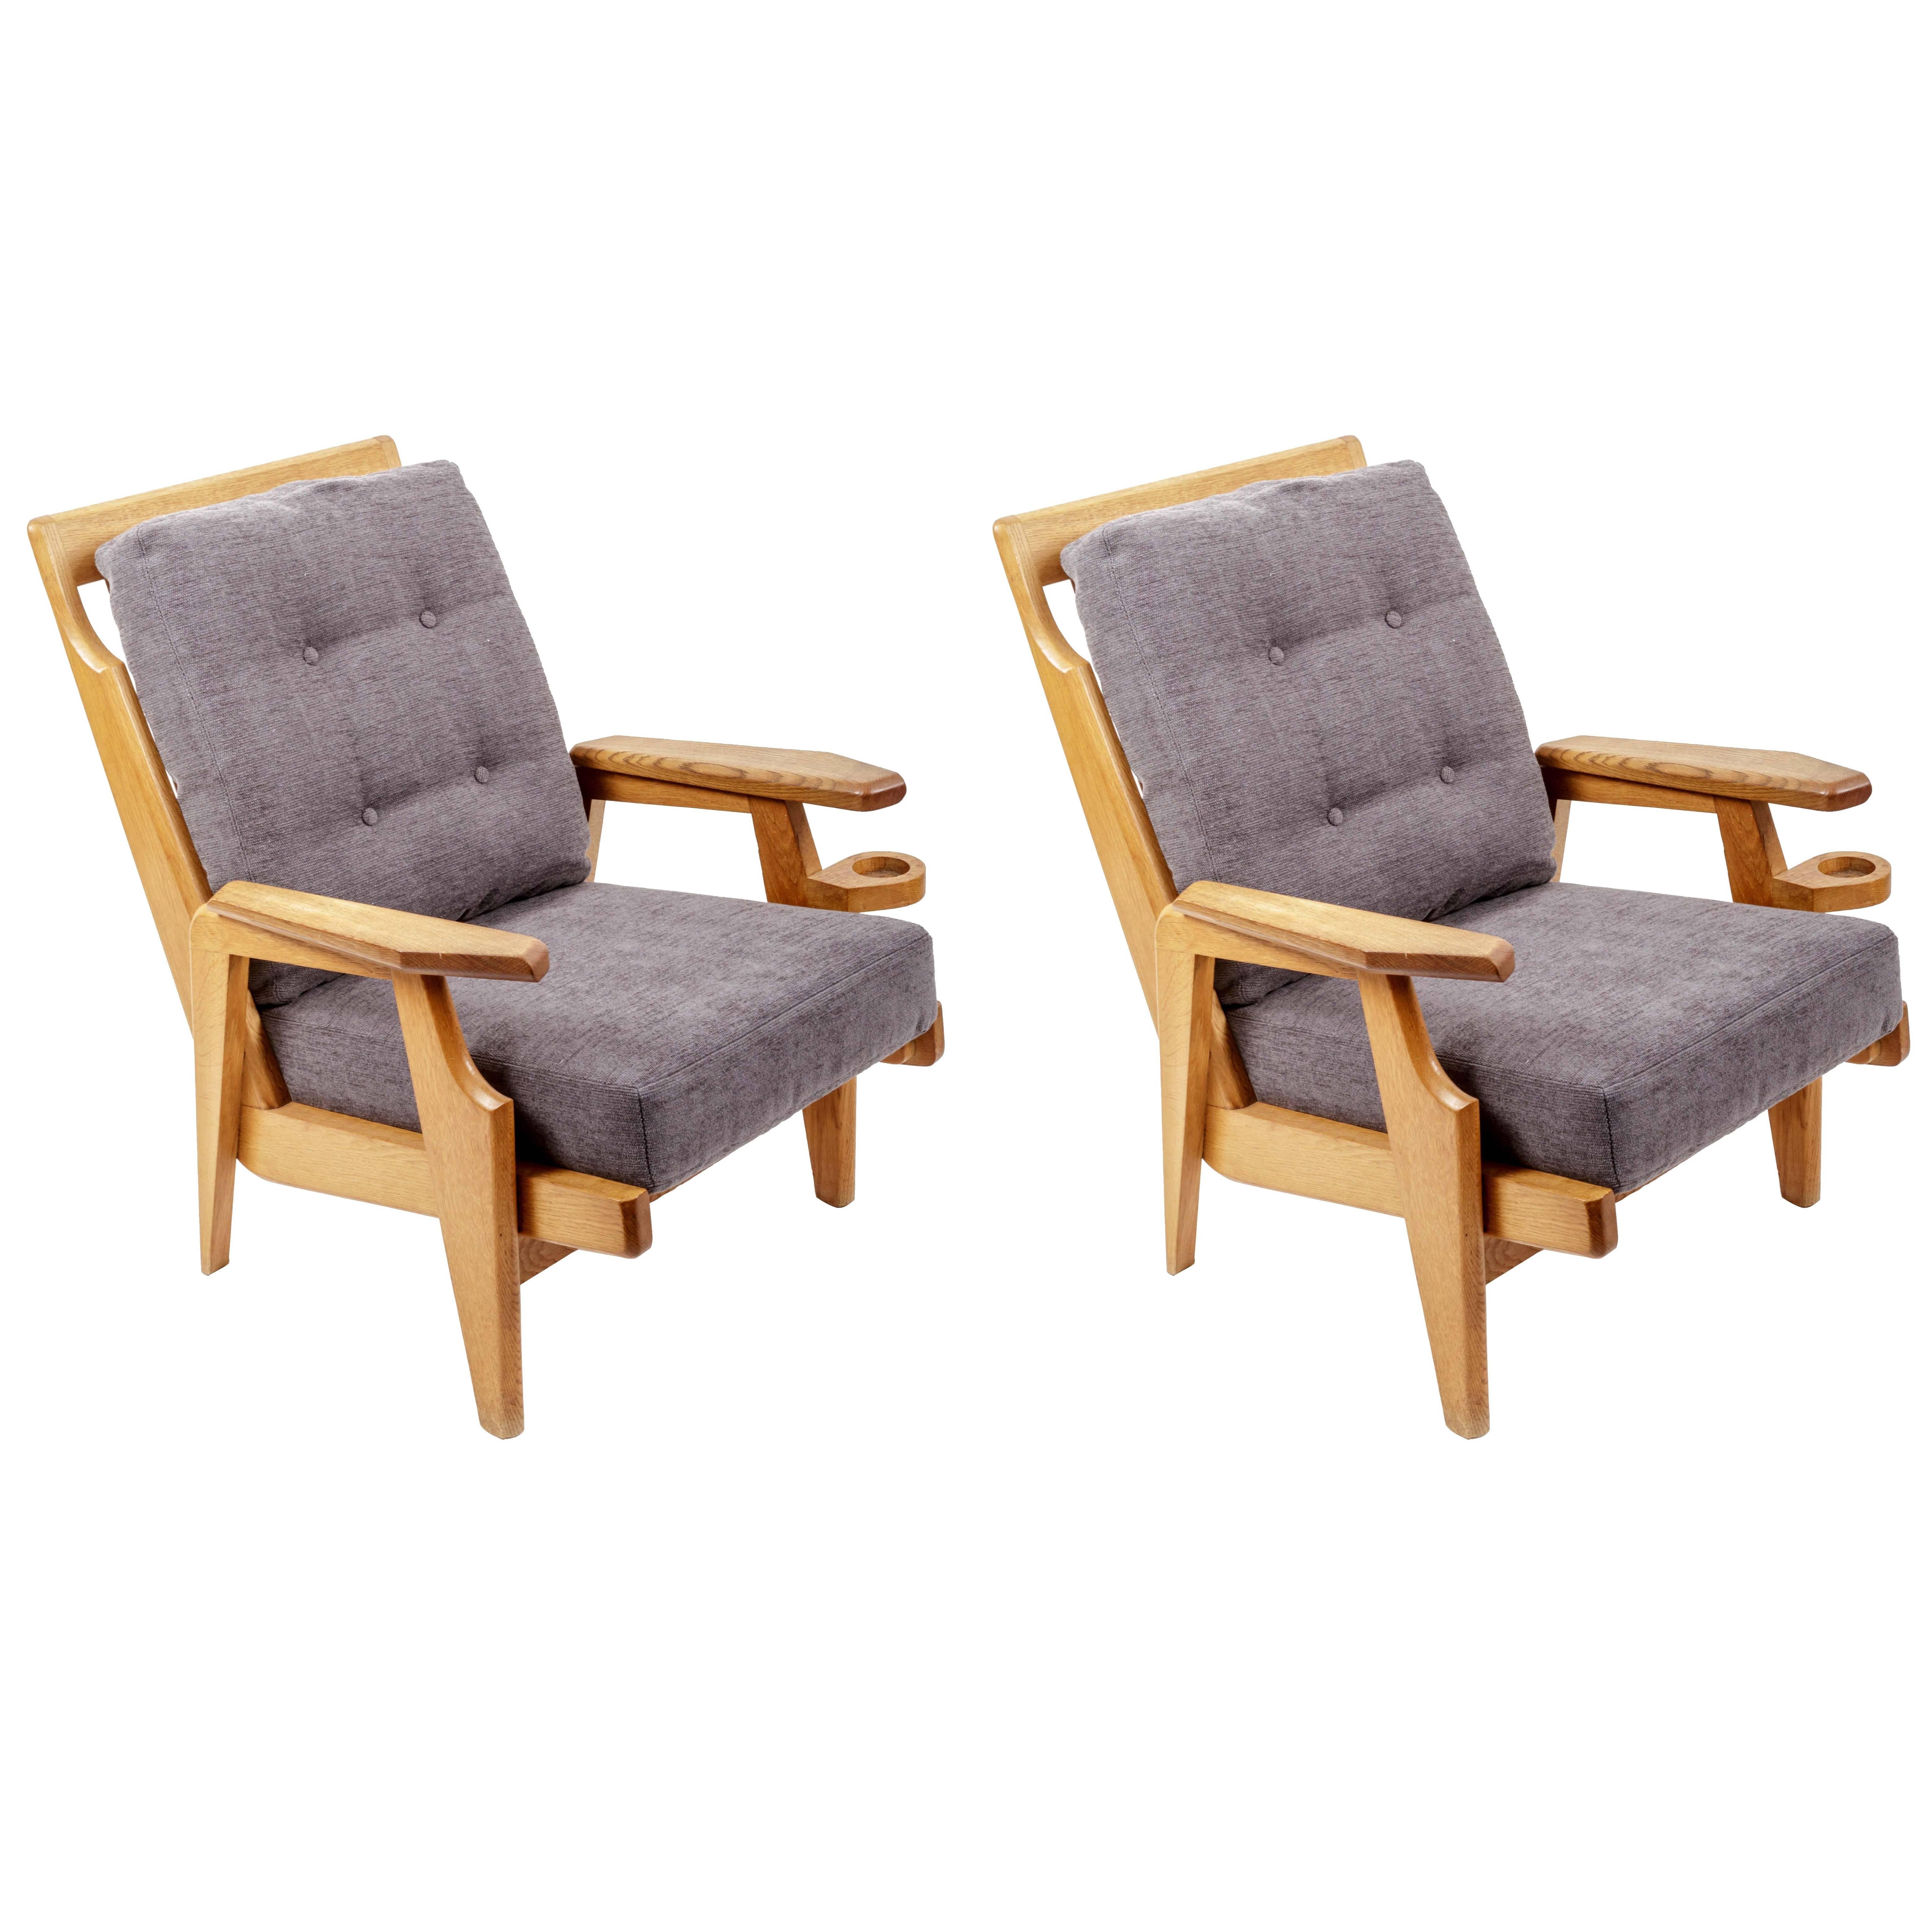 Pair of Wooden Armchairs by Guillerme et Chambron